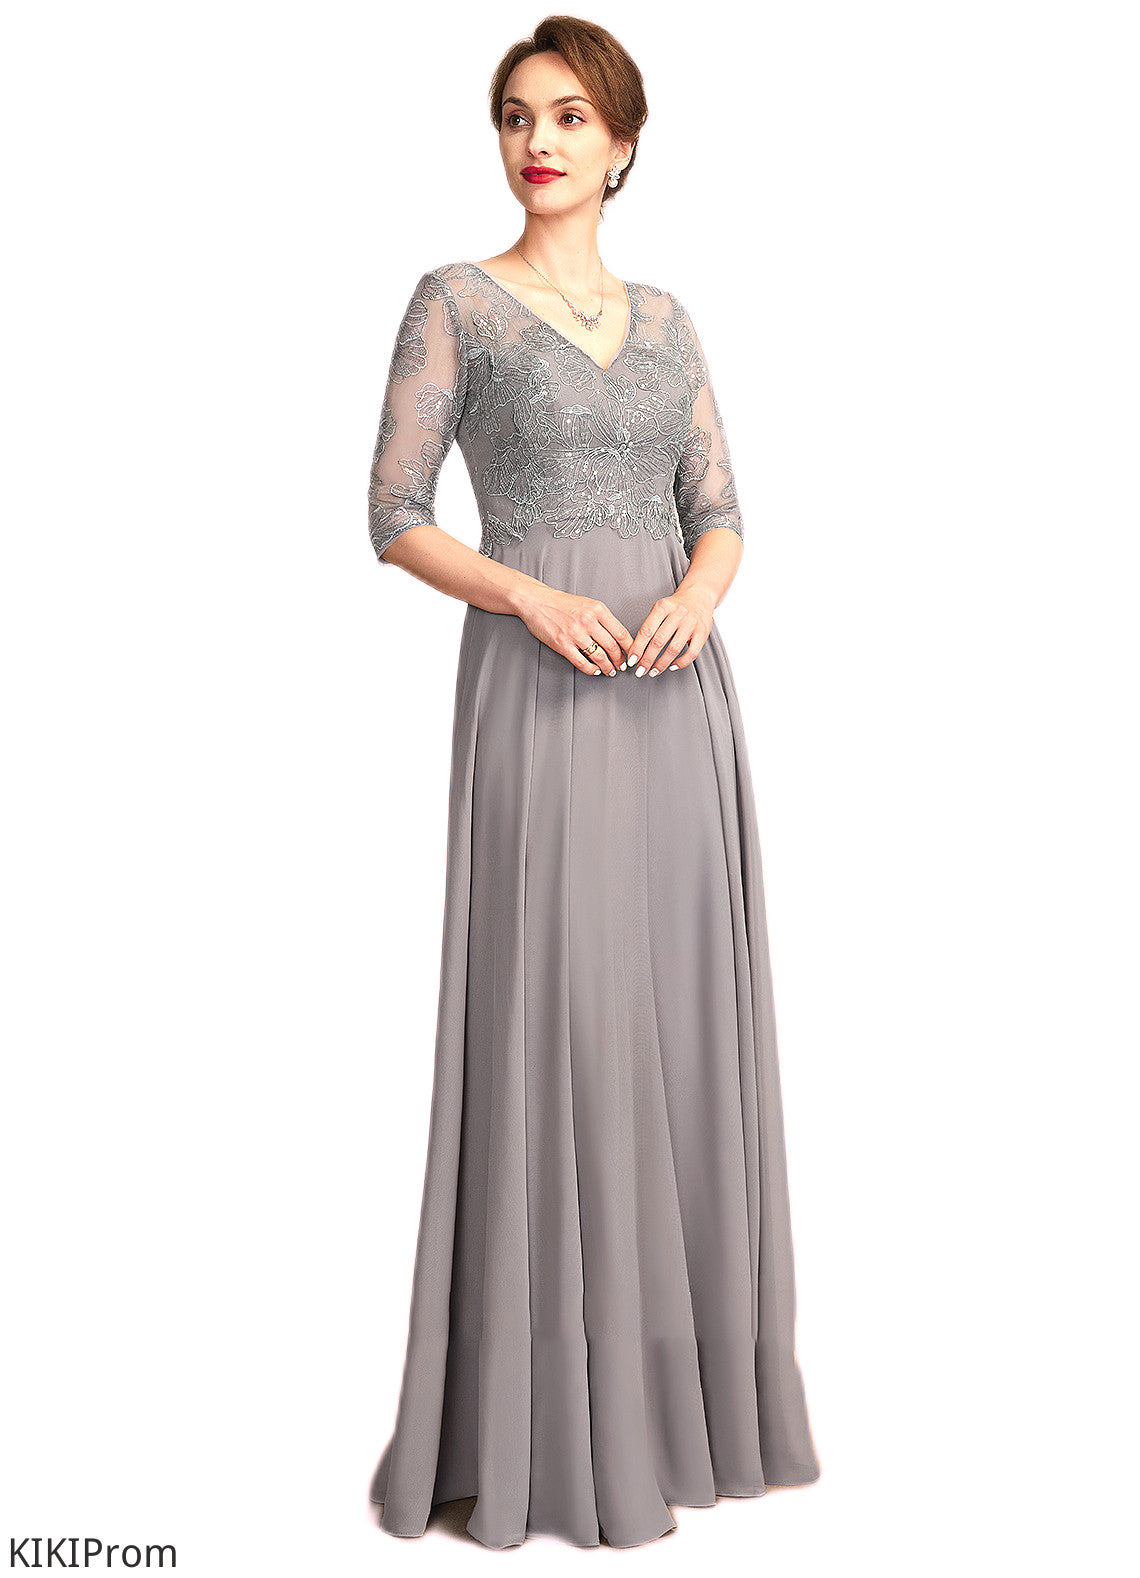 Camila A-Line V-neck Floor-Length Chiffon Lace Mother of the Bride Dress With Sequins DZ126P0014999